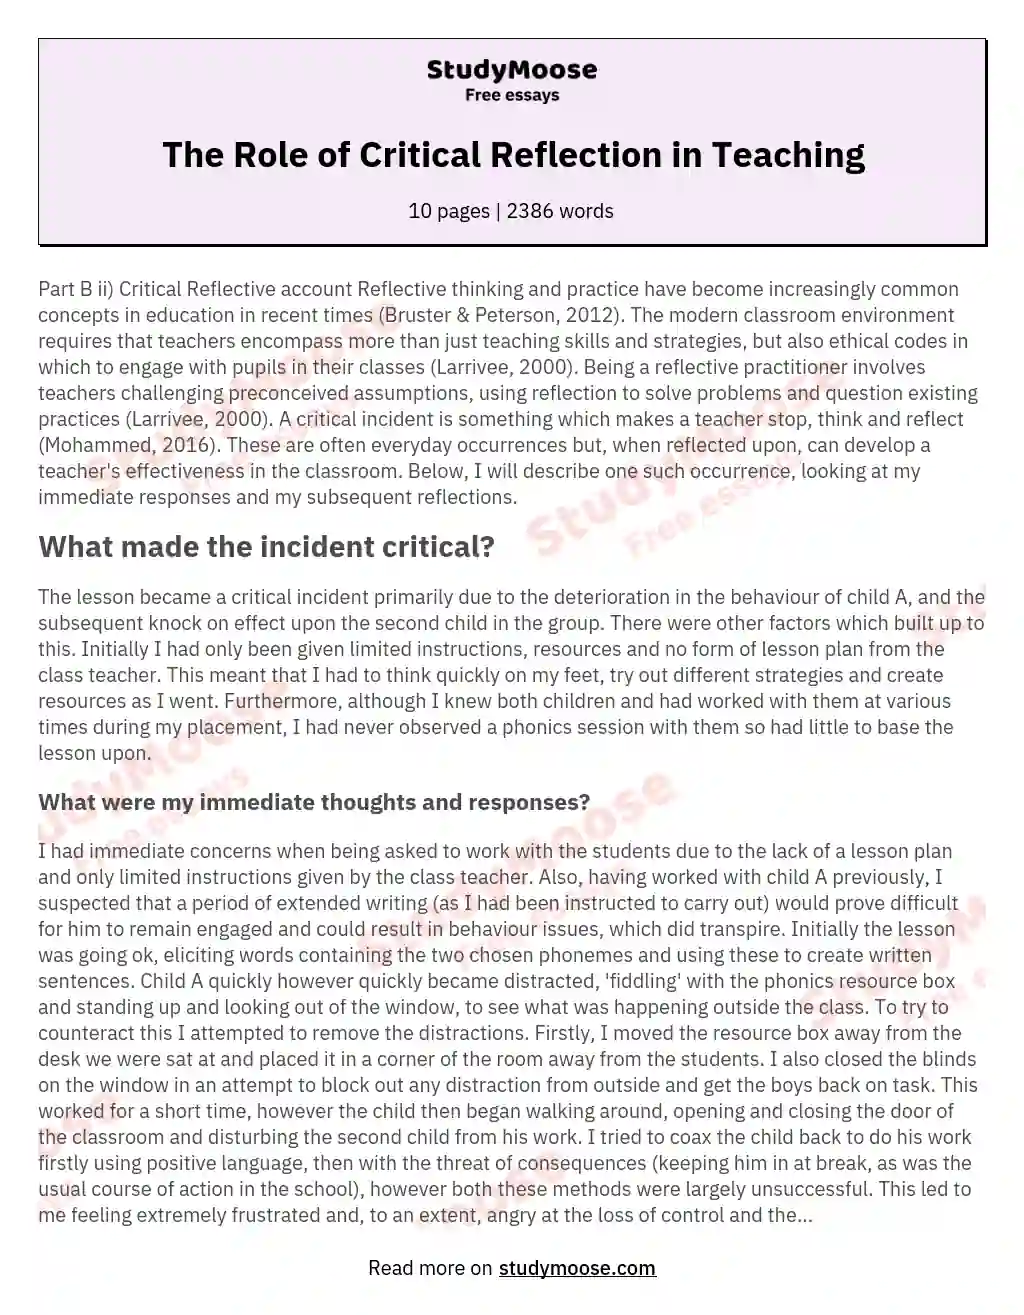 critical reflection on your own education experience